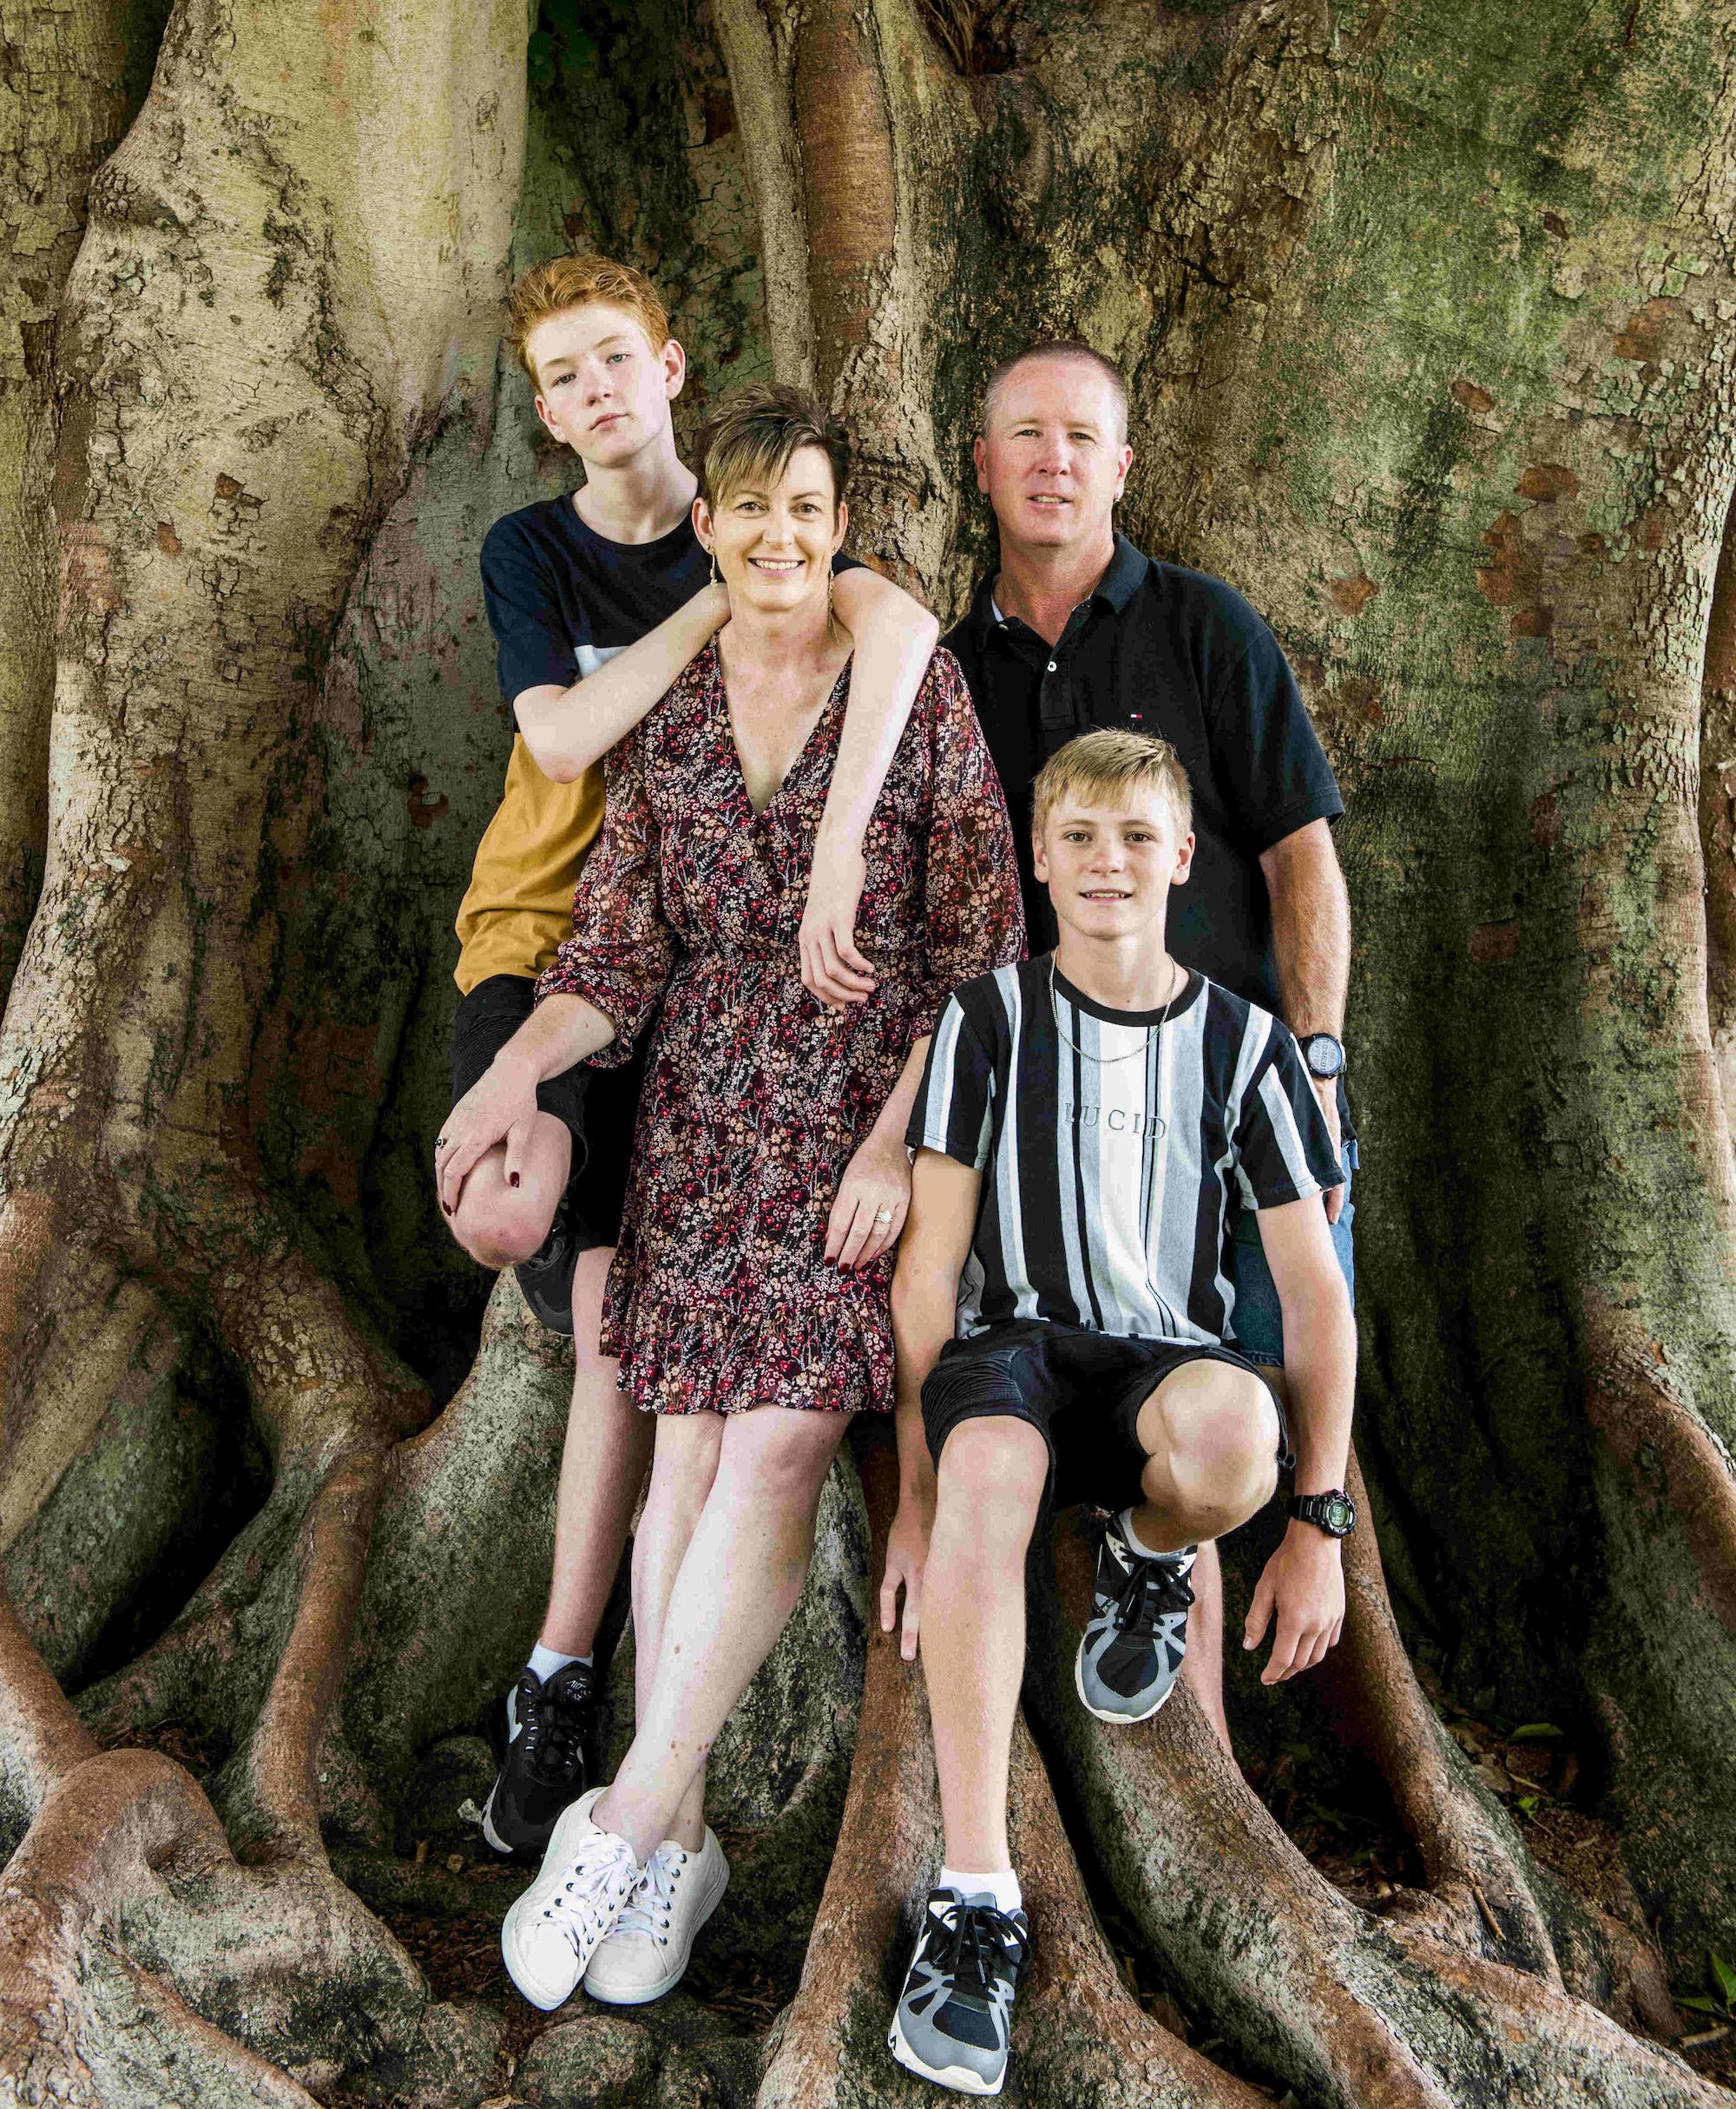 Sarah Stein, owner of Miss Efficiency, and her family. They're standing in front of the base of a huge tree.